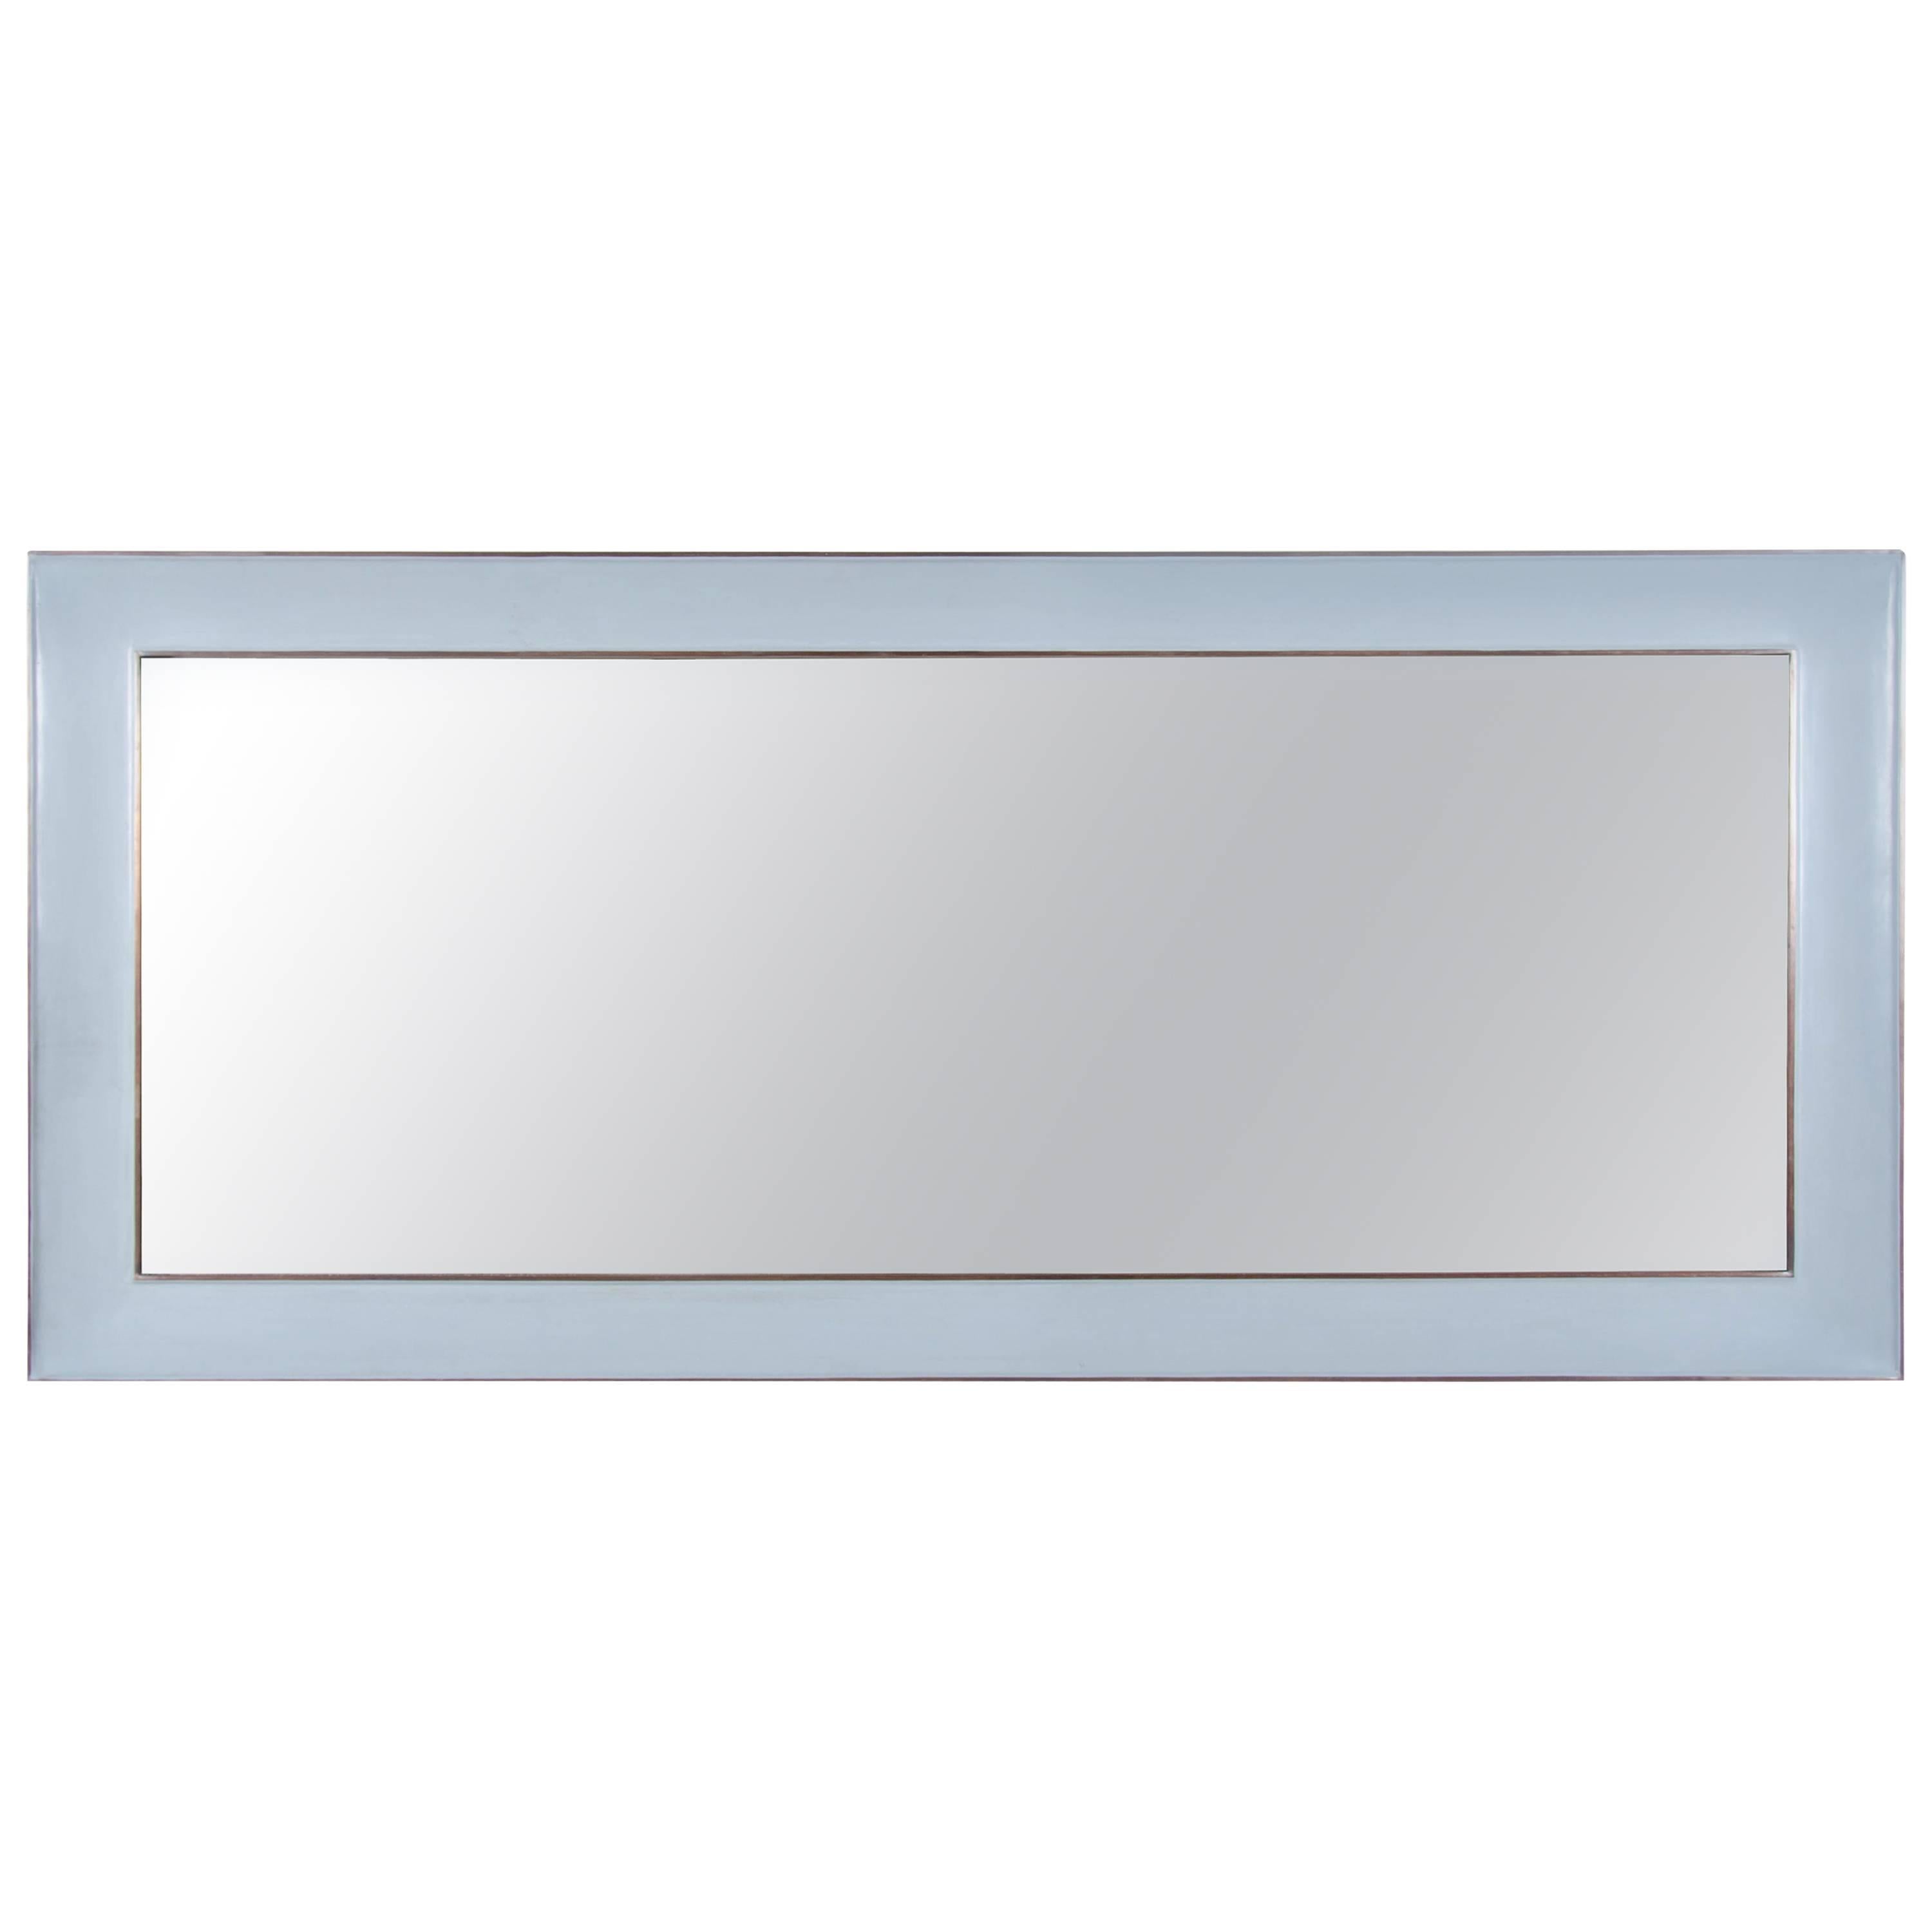 Full Length Vanity Mirror with Copper Trim by Robert Kuo, Limited Edition For Sale